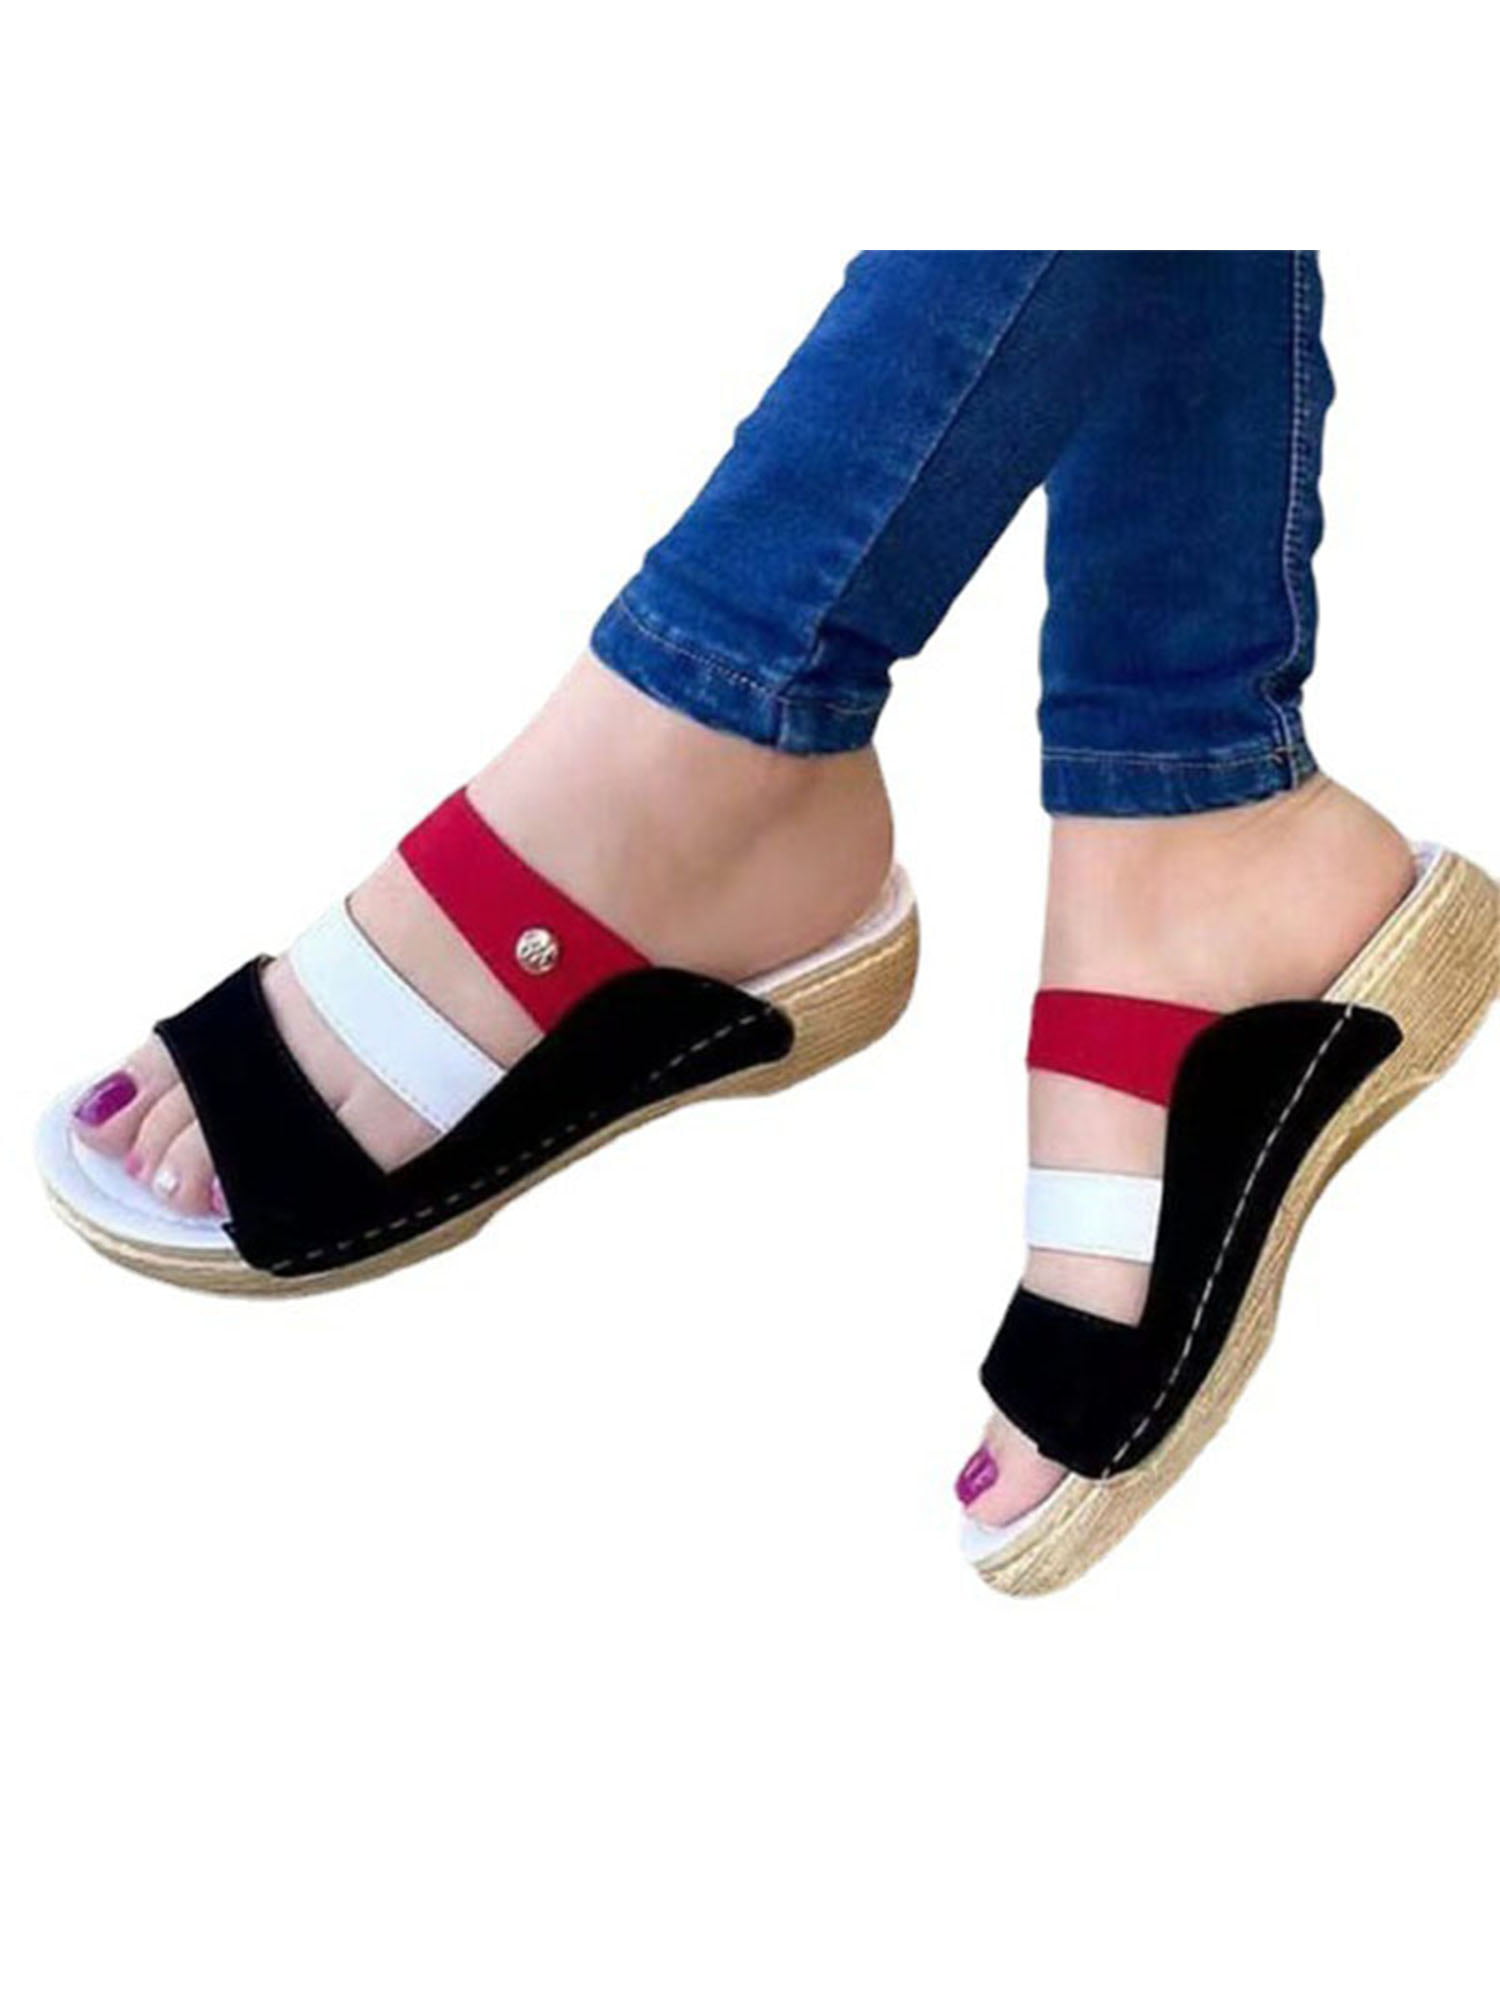 Women Summer Slippers Comfy Rainbow Platform Slide Sandal 2020 New Beach Travel Shoes Ladies Shoes by Nevera 